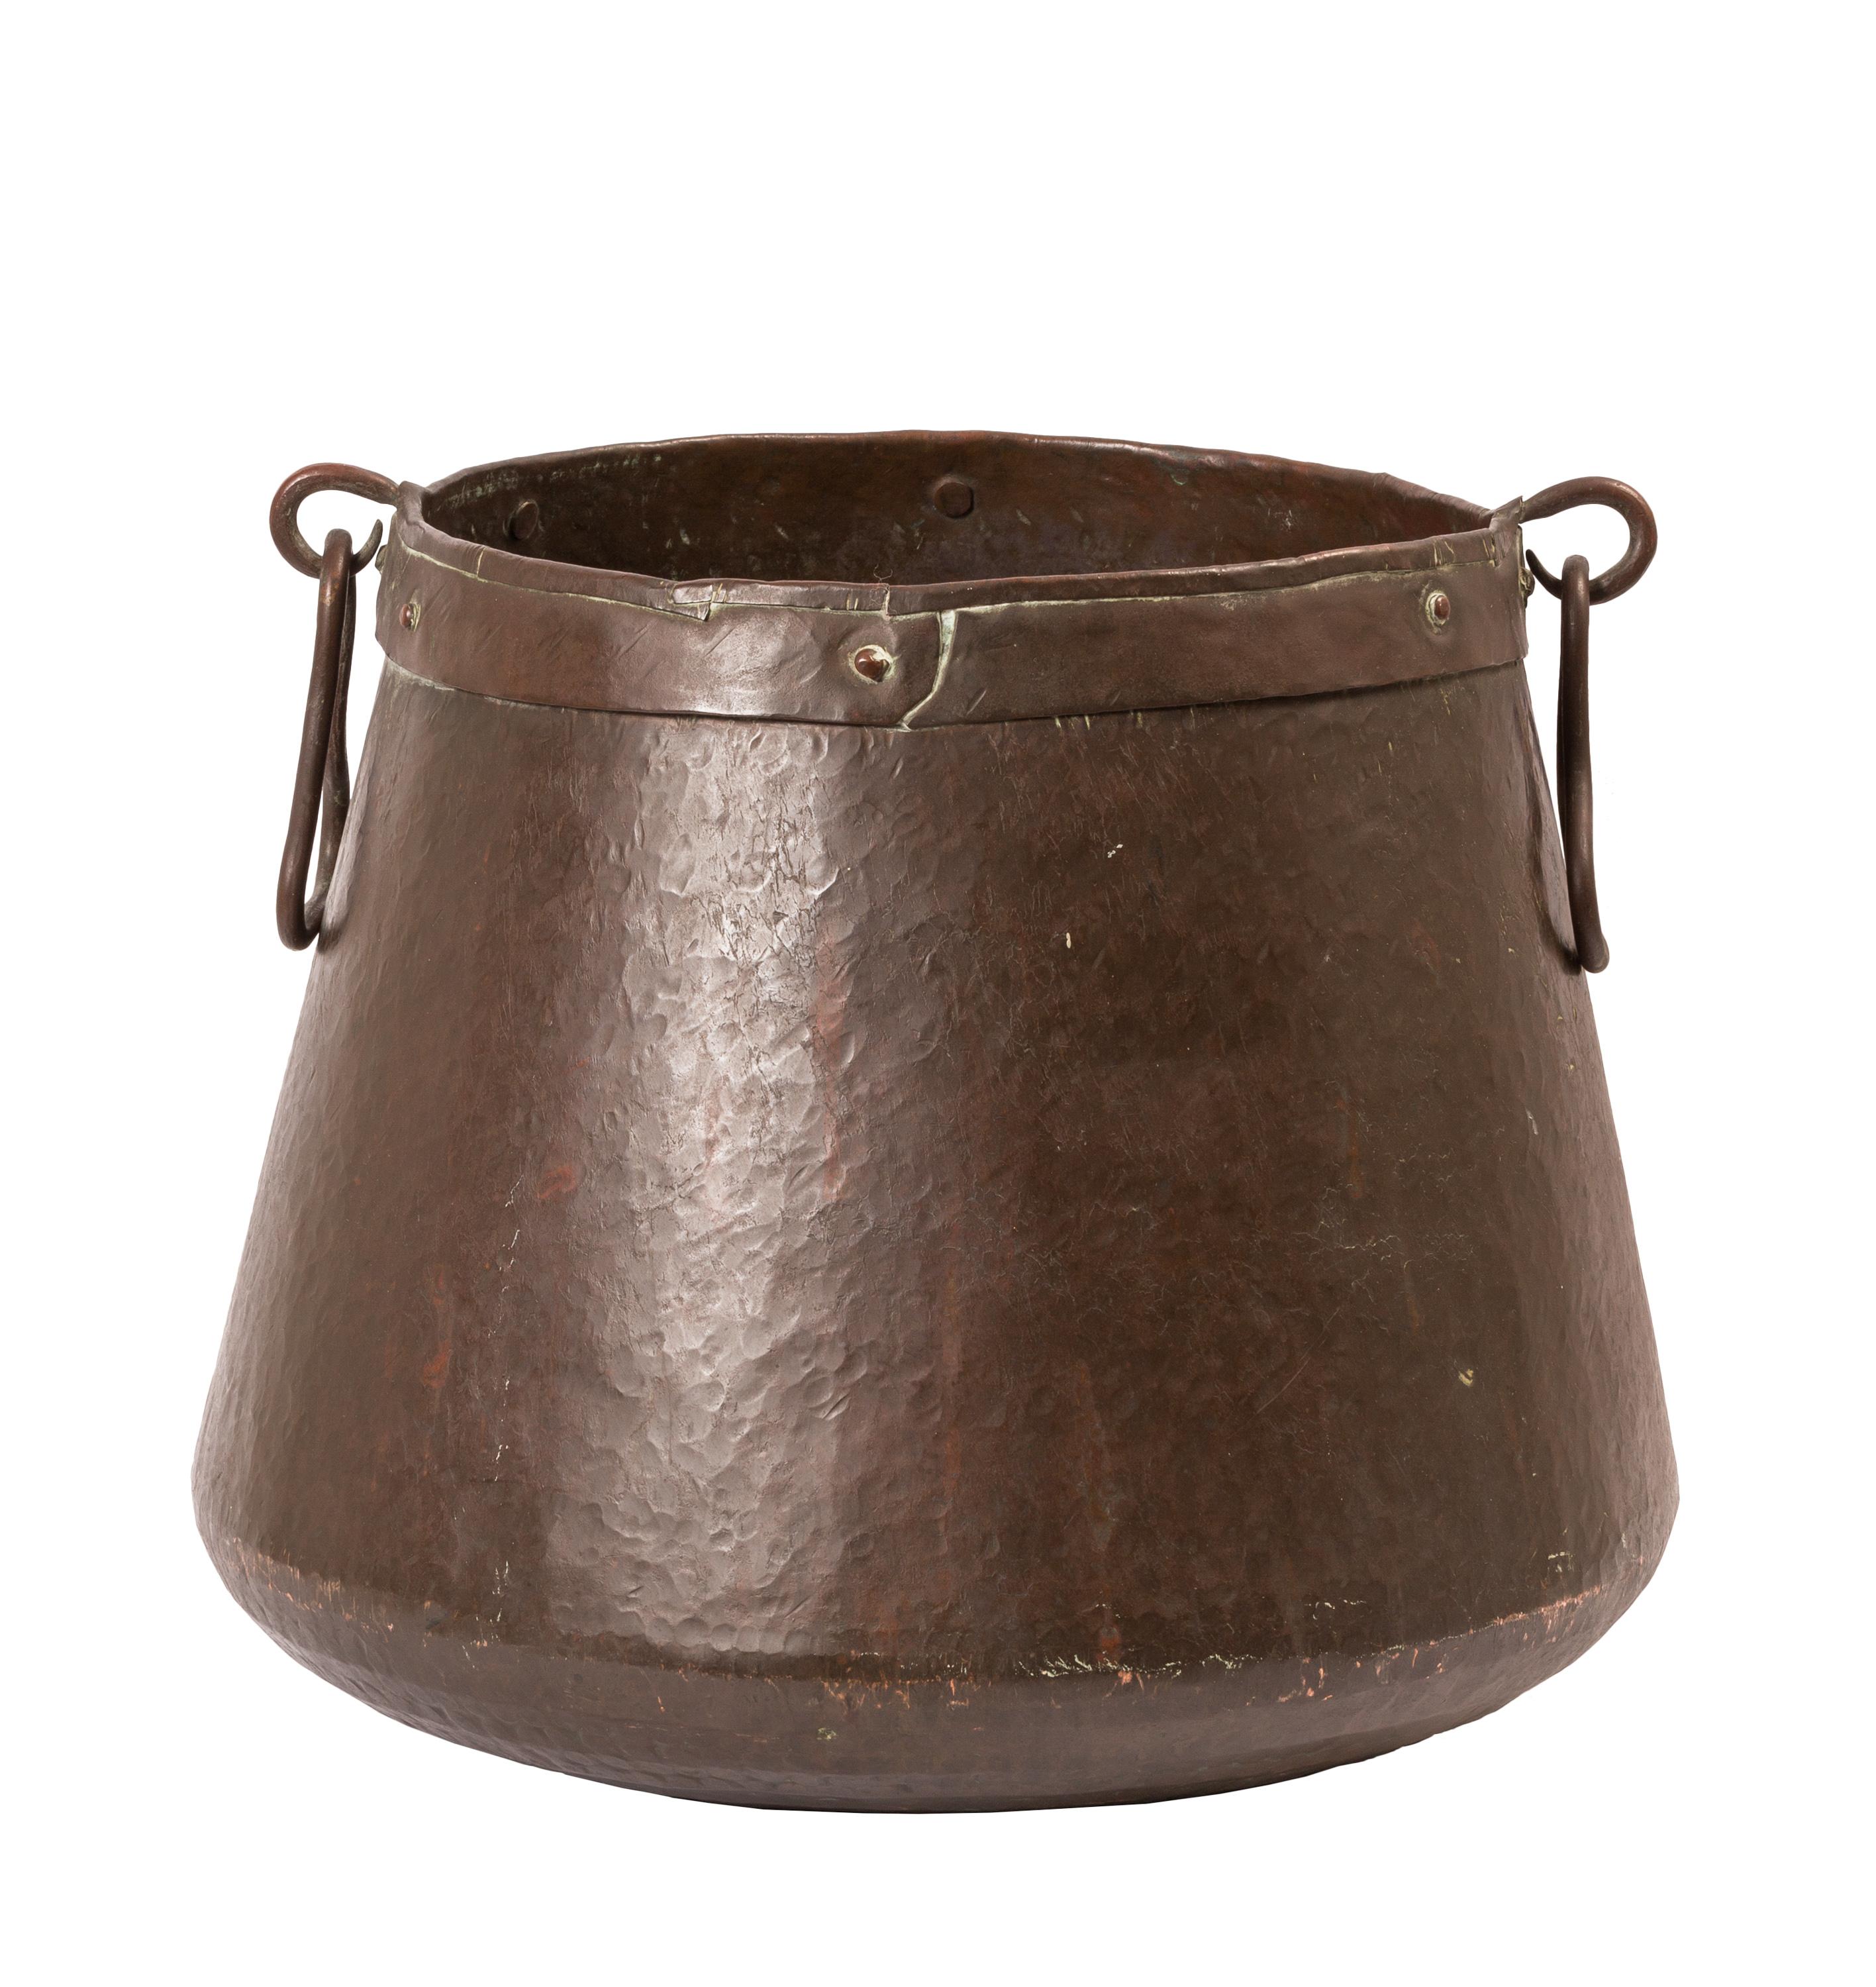 This large size 19th century hand-hammered copper cauldron cook pot with rich chocolate brown patina is paired with a heavy wrought iron tripod. Originally designed to sit directly above the hot coals of a cook fire or fireplace, rich country stews,